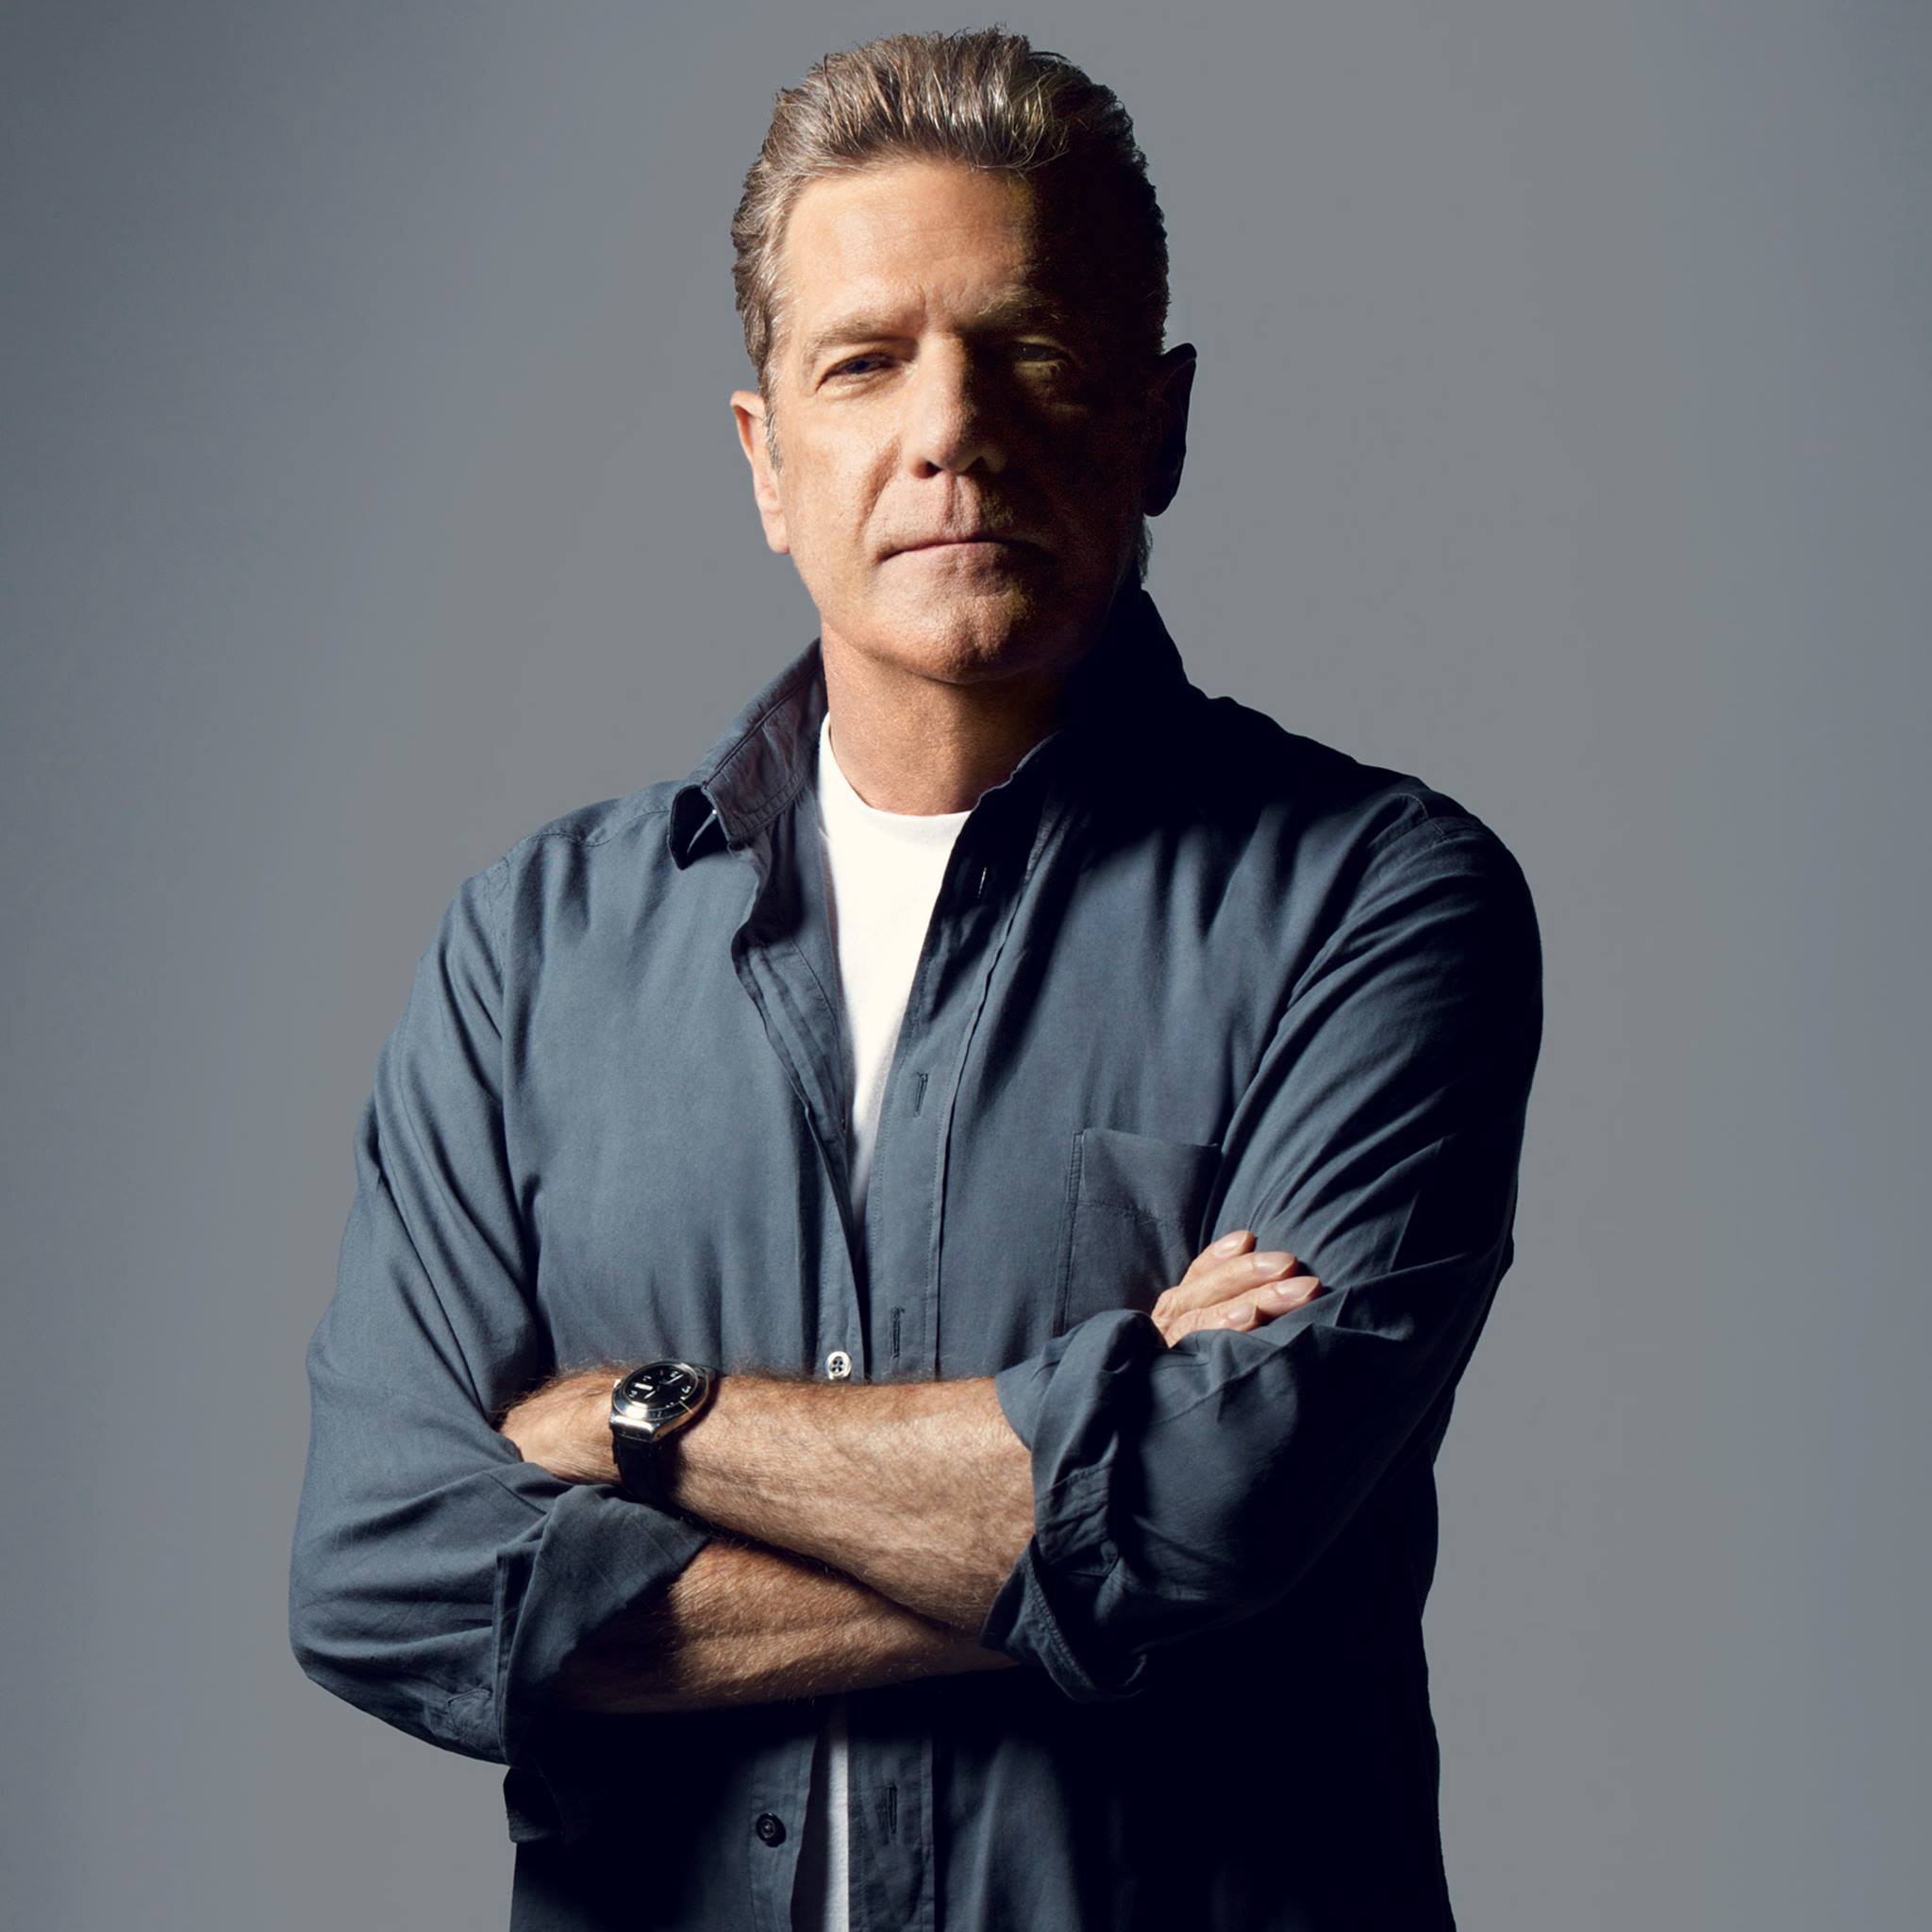 https://static.wikia.nocookie.net/marvelcinematicuniverse/images/8/8a/Glenn_Frey.jpg/revision/latest?cb=20231222191439